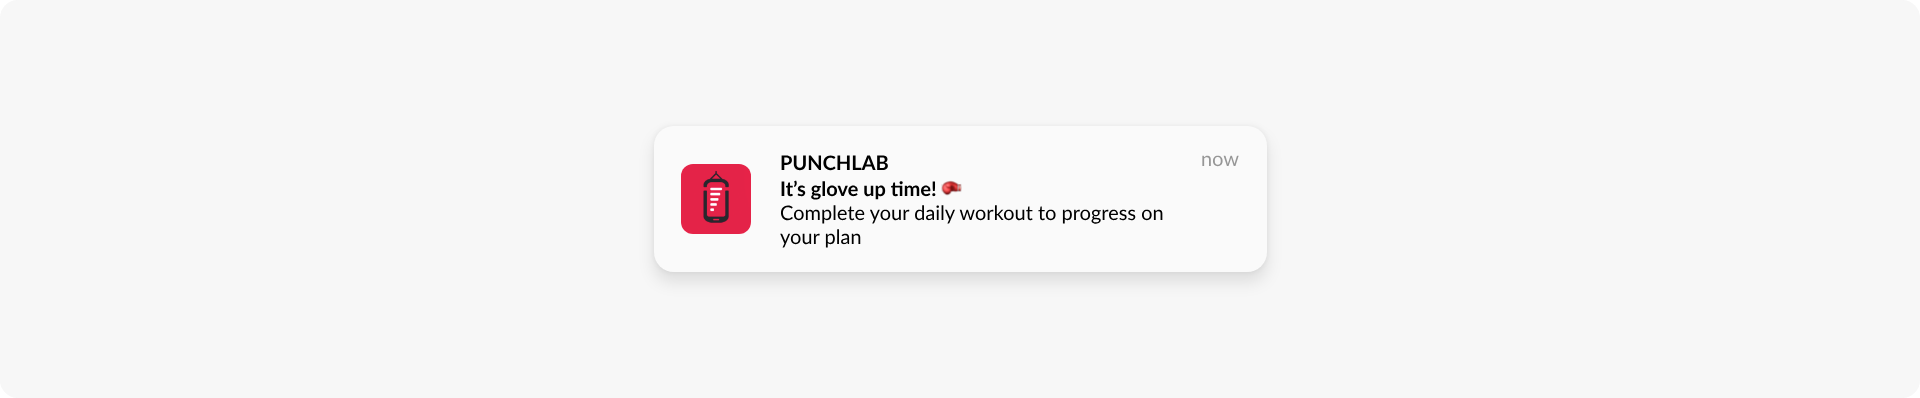 Push notification reminder for customer retention - example from PunchLab